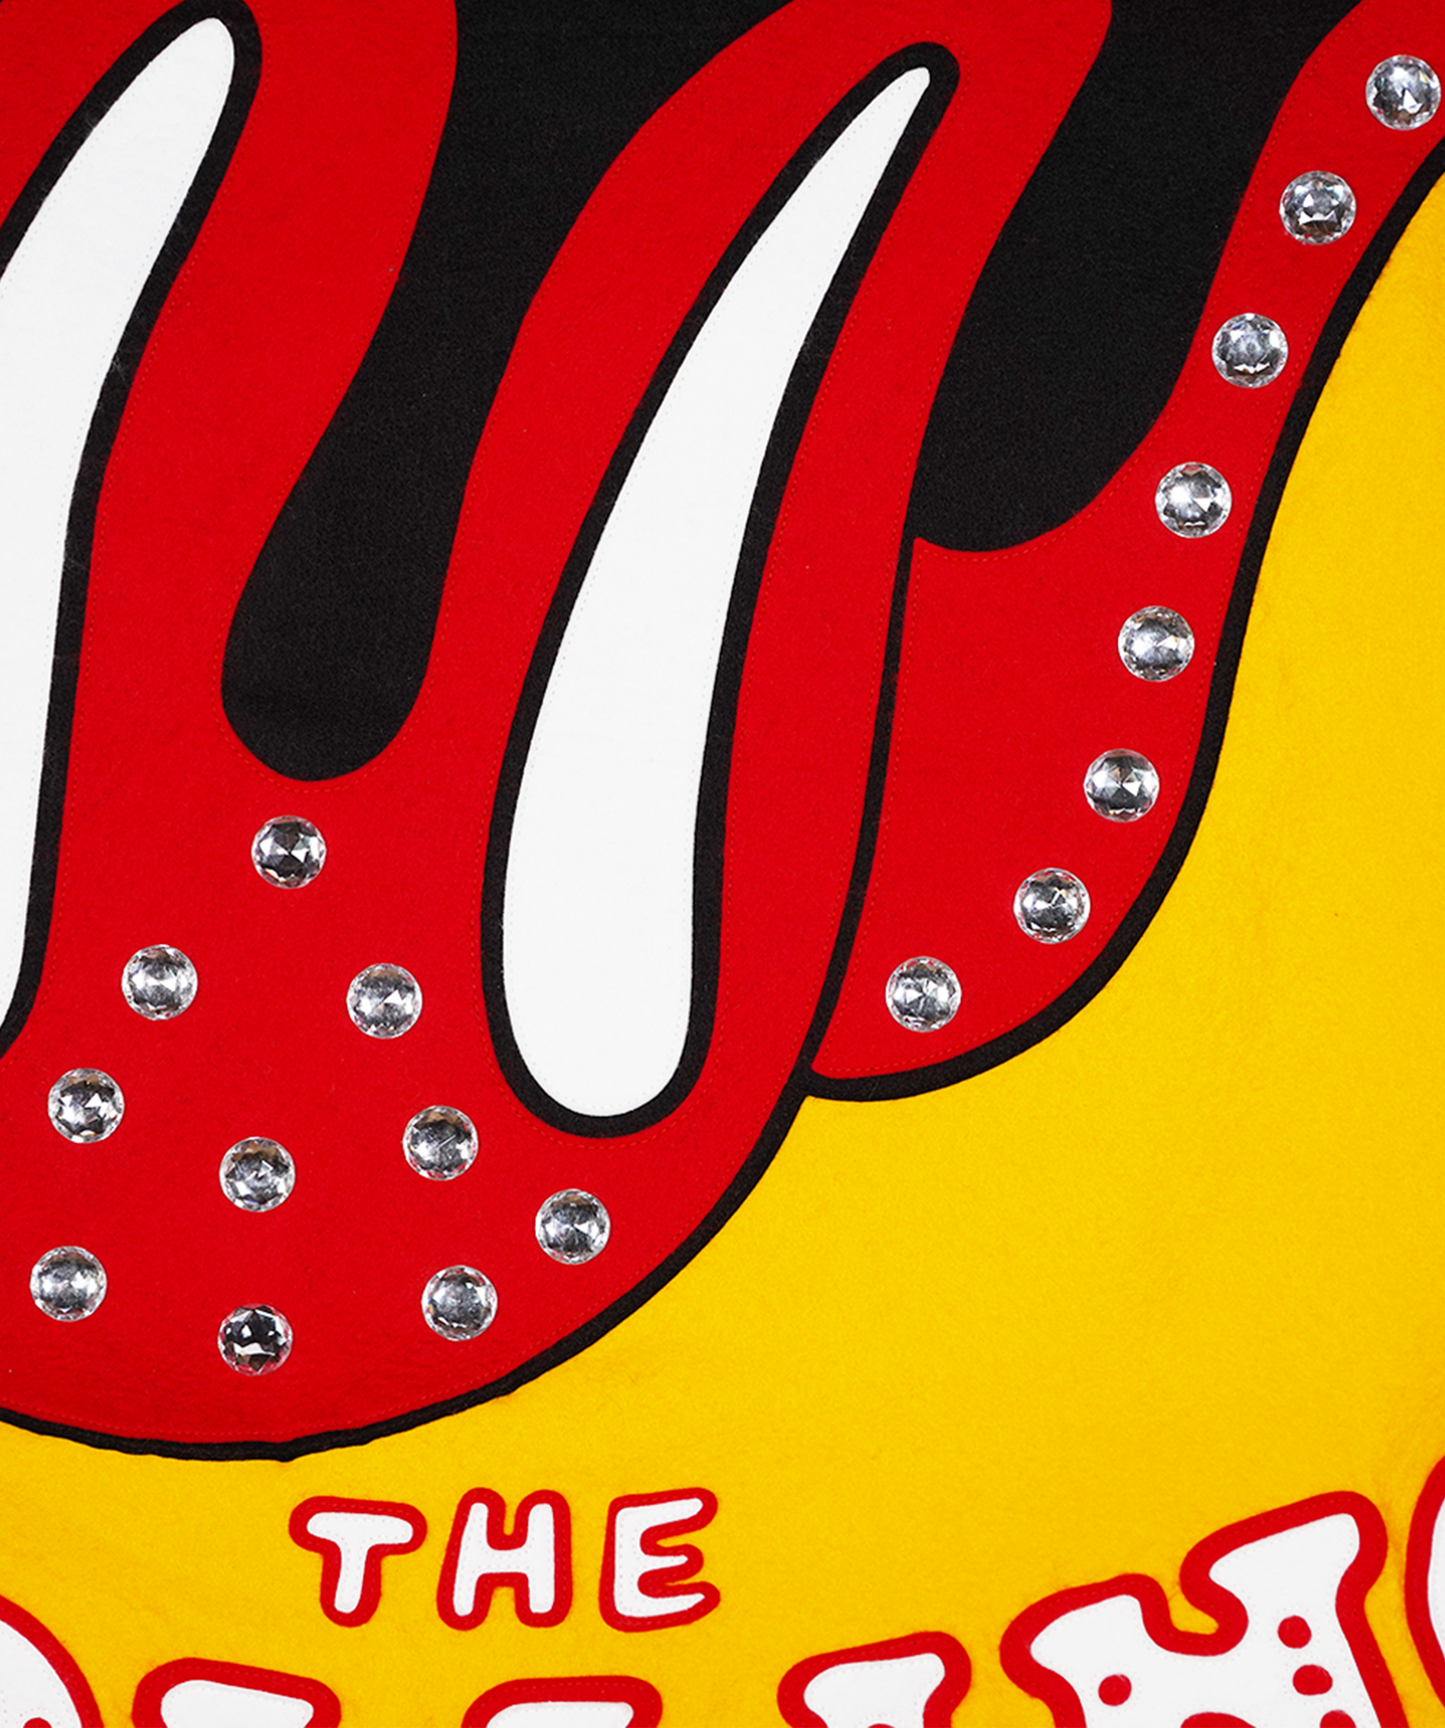 The Rolling Stones Championship Banner • The Rolling Stones x Oxford Pennant